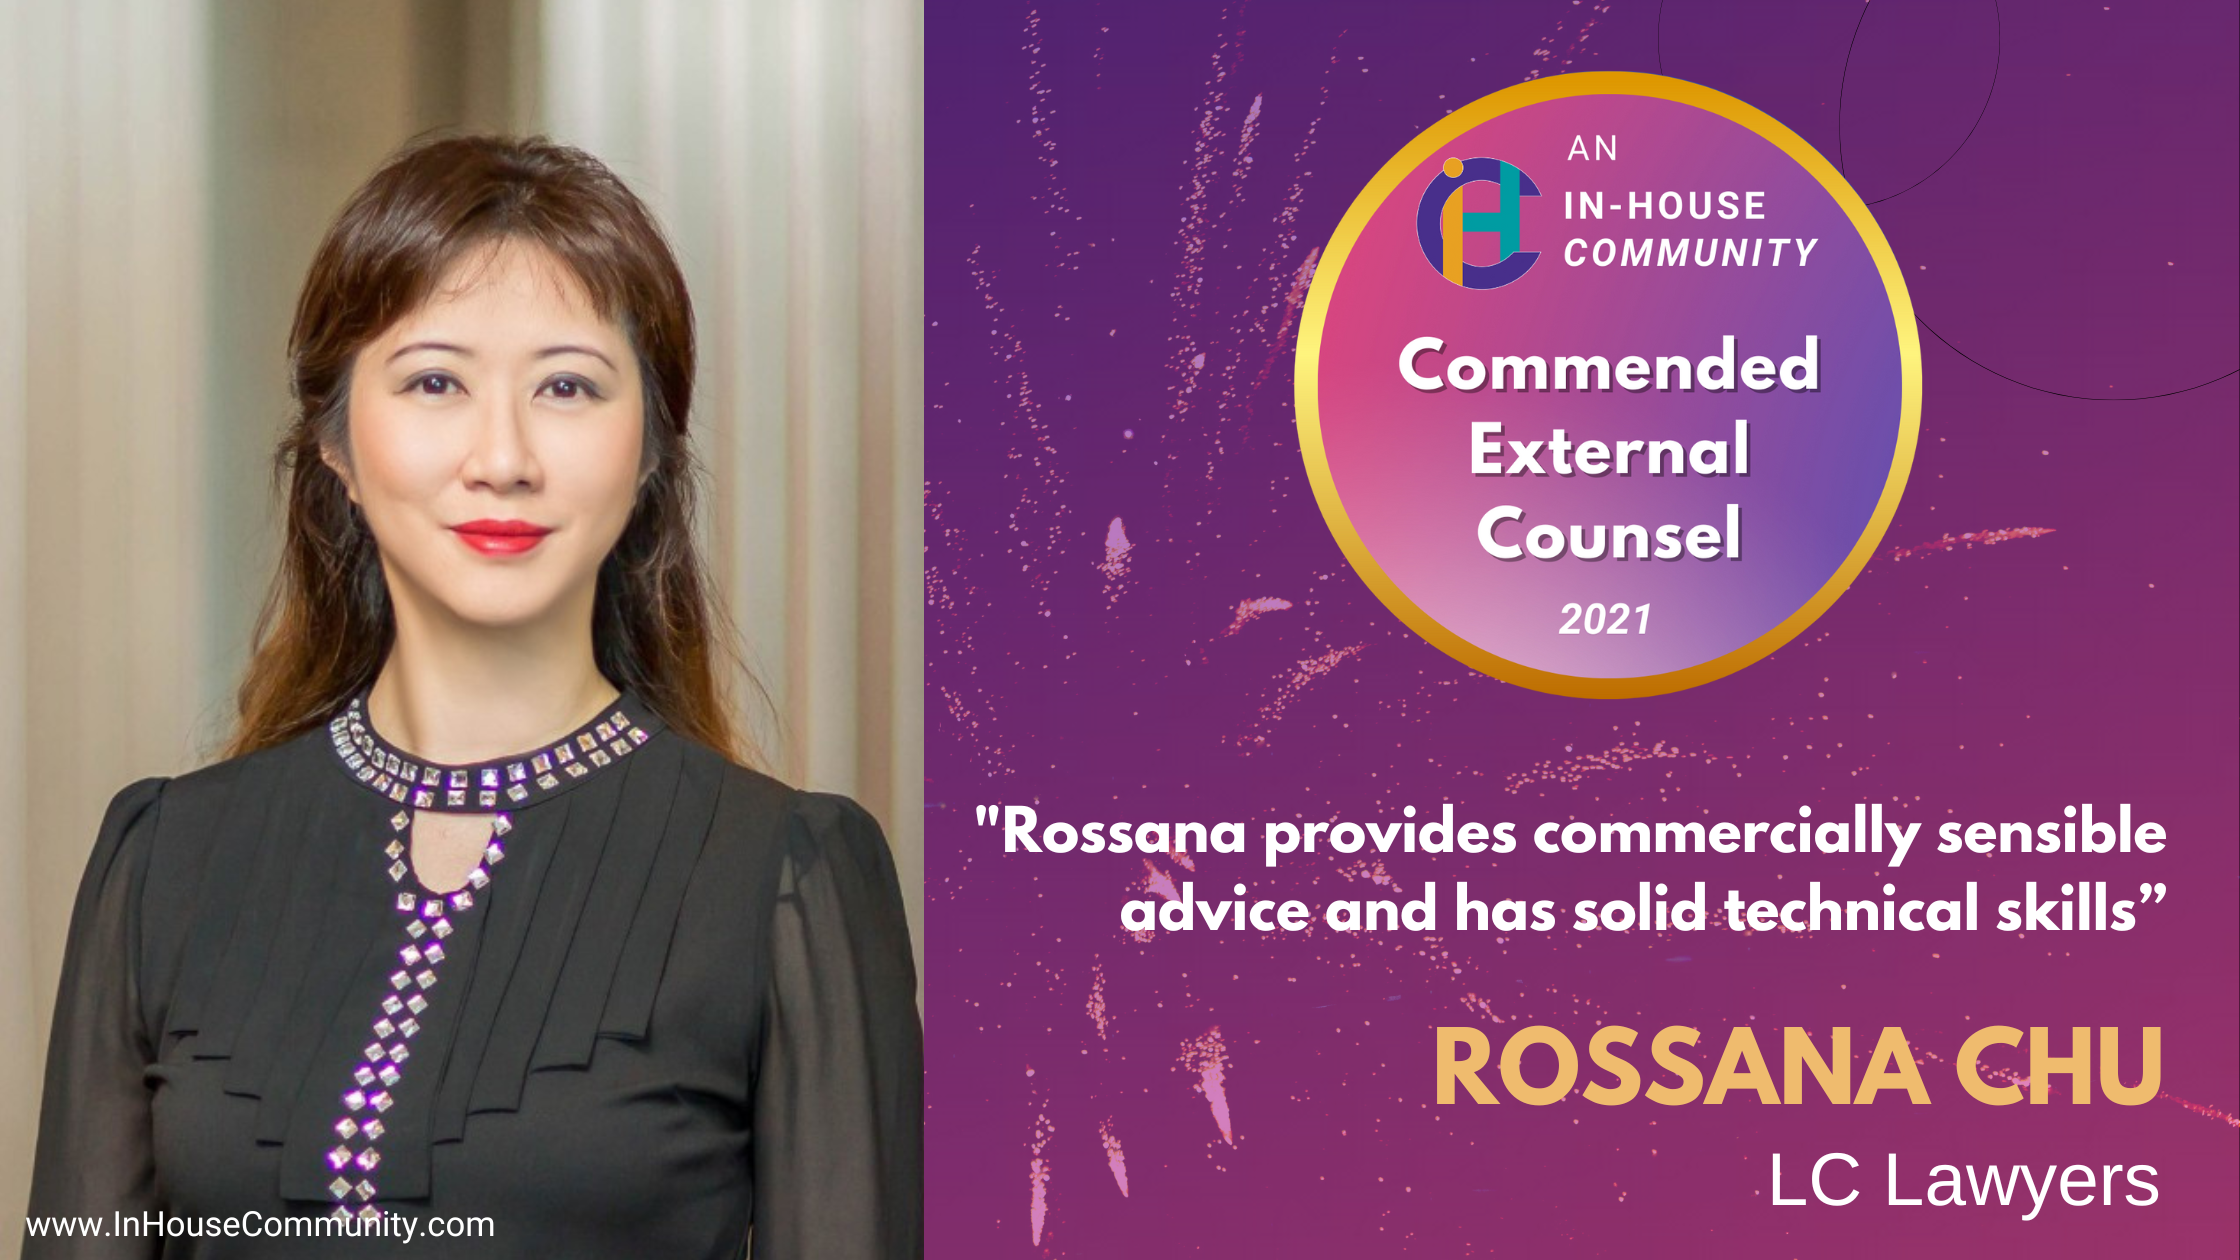 Rossana Chu is named as an “In-House Community Commended External Counsel of the Year”, 2021